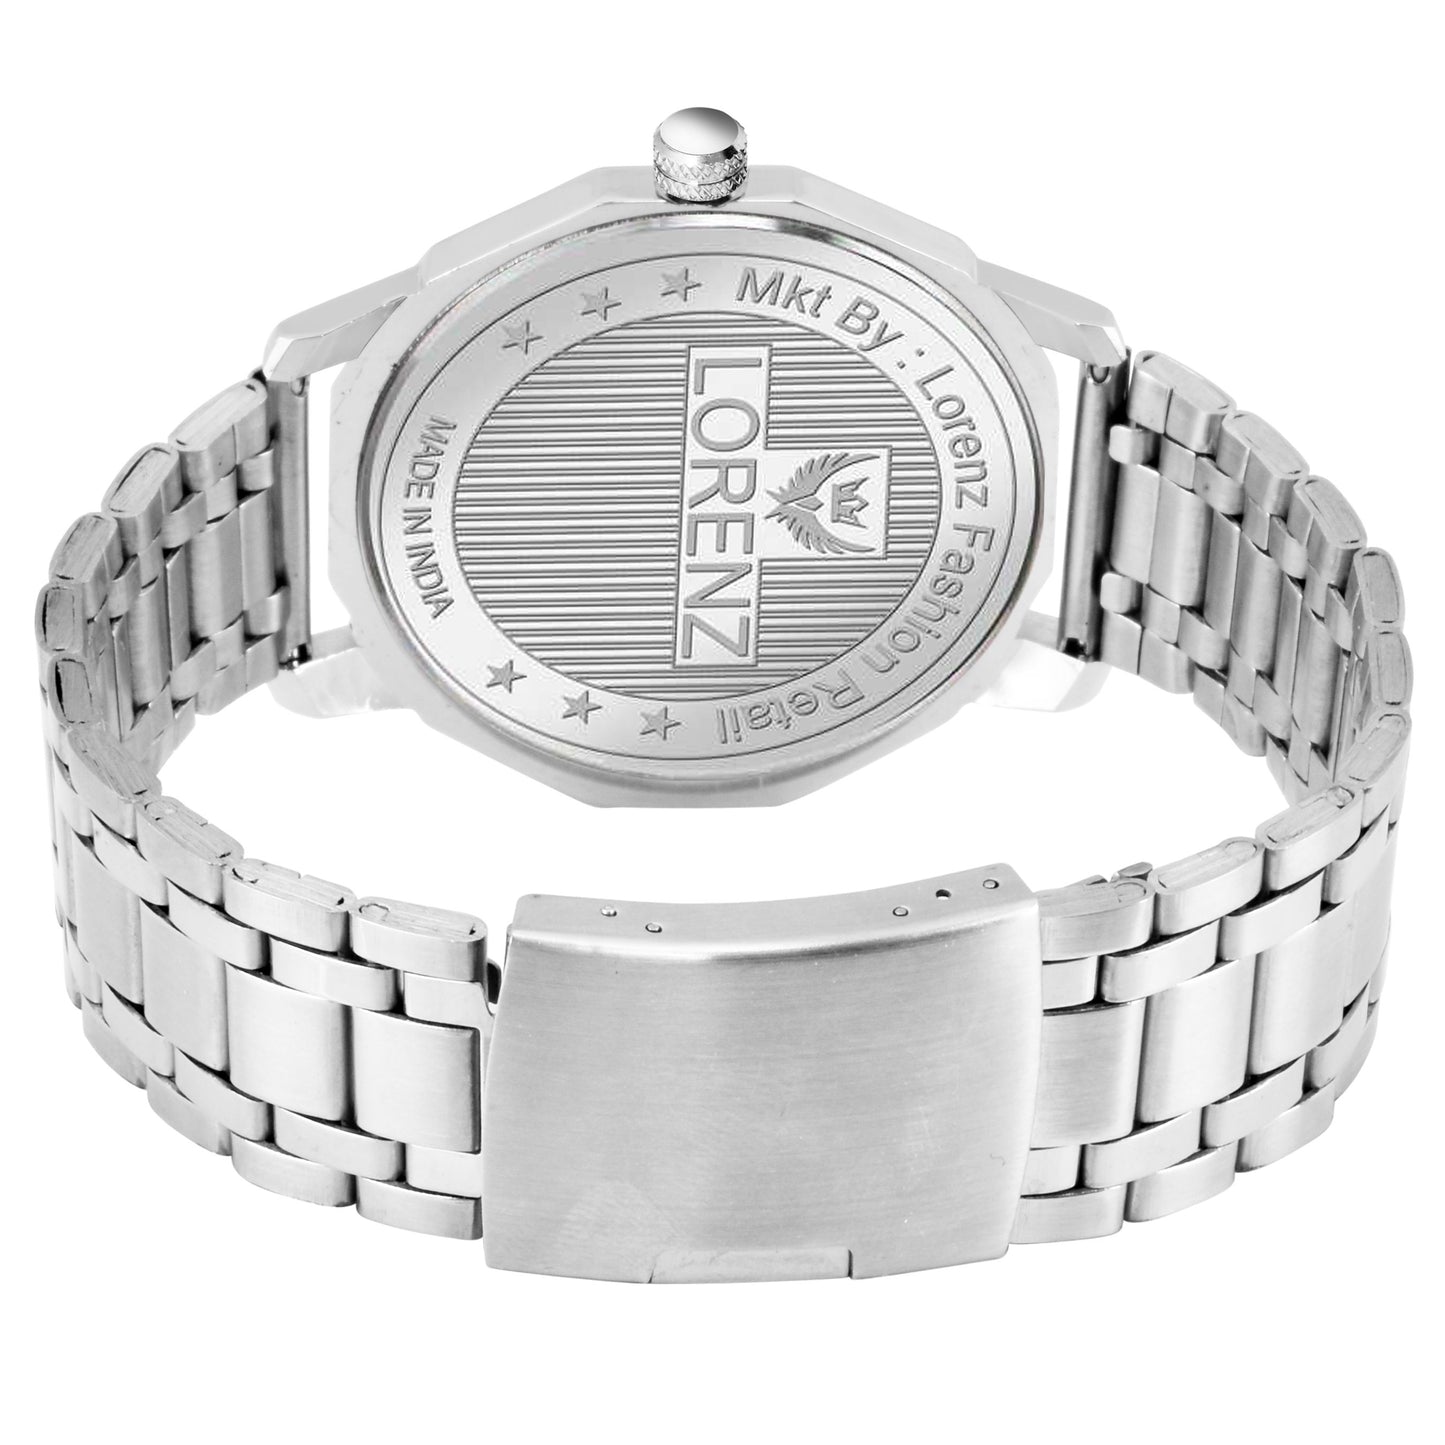 Lorenz Analogue Date Functioning Stainless Steel Chain Watch for Men